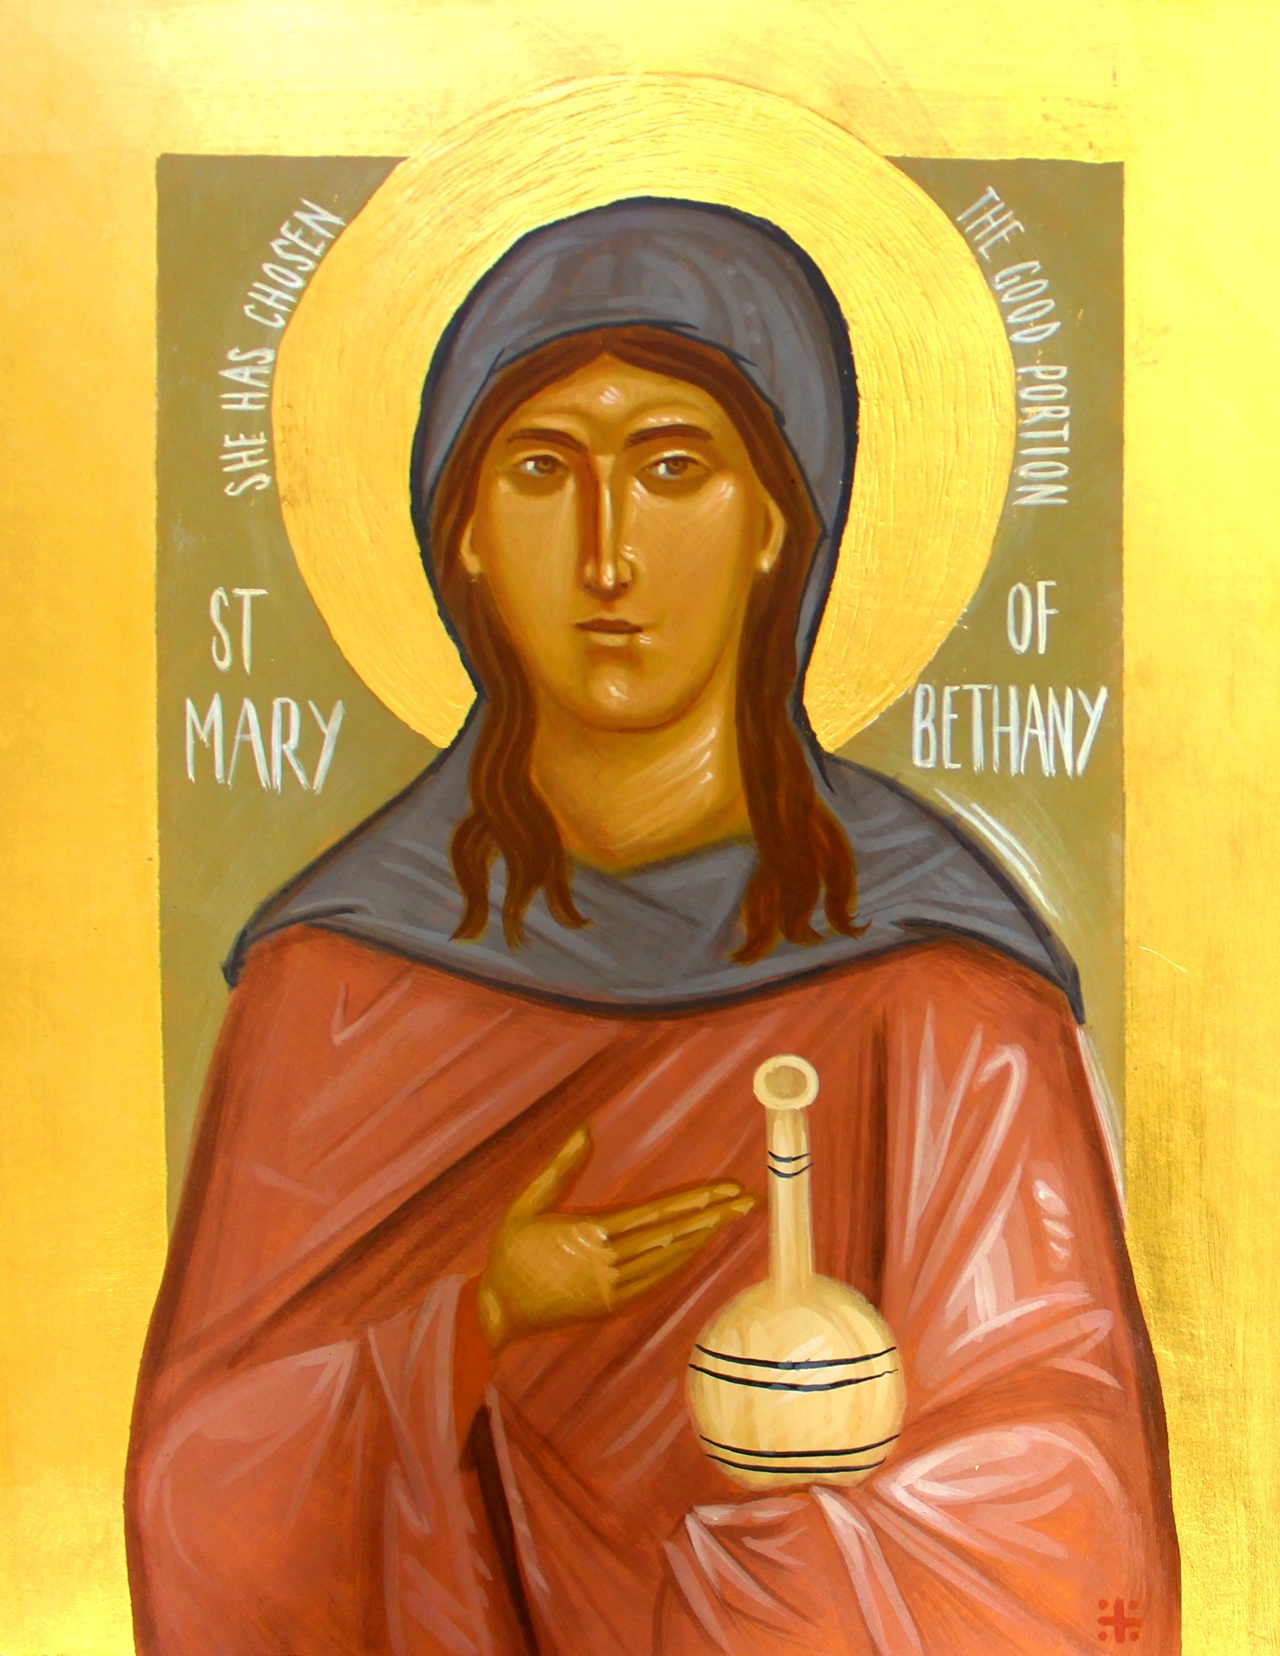 St. Mary of Bethany, the twice-praised